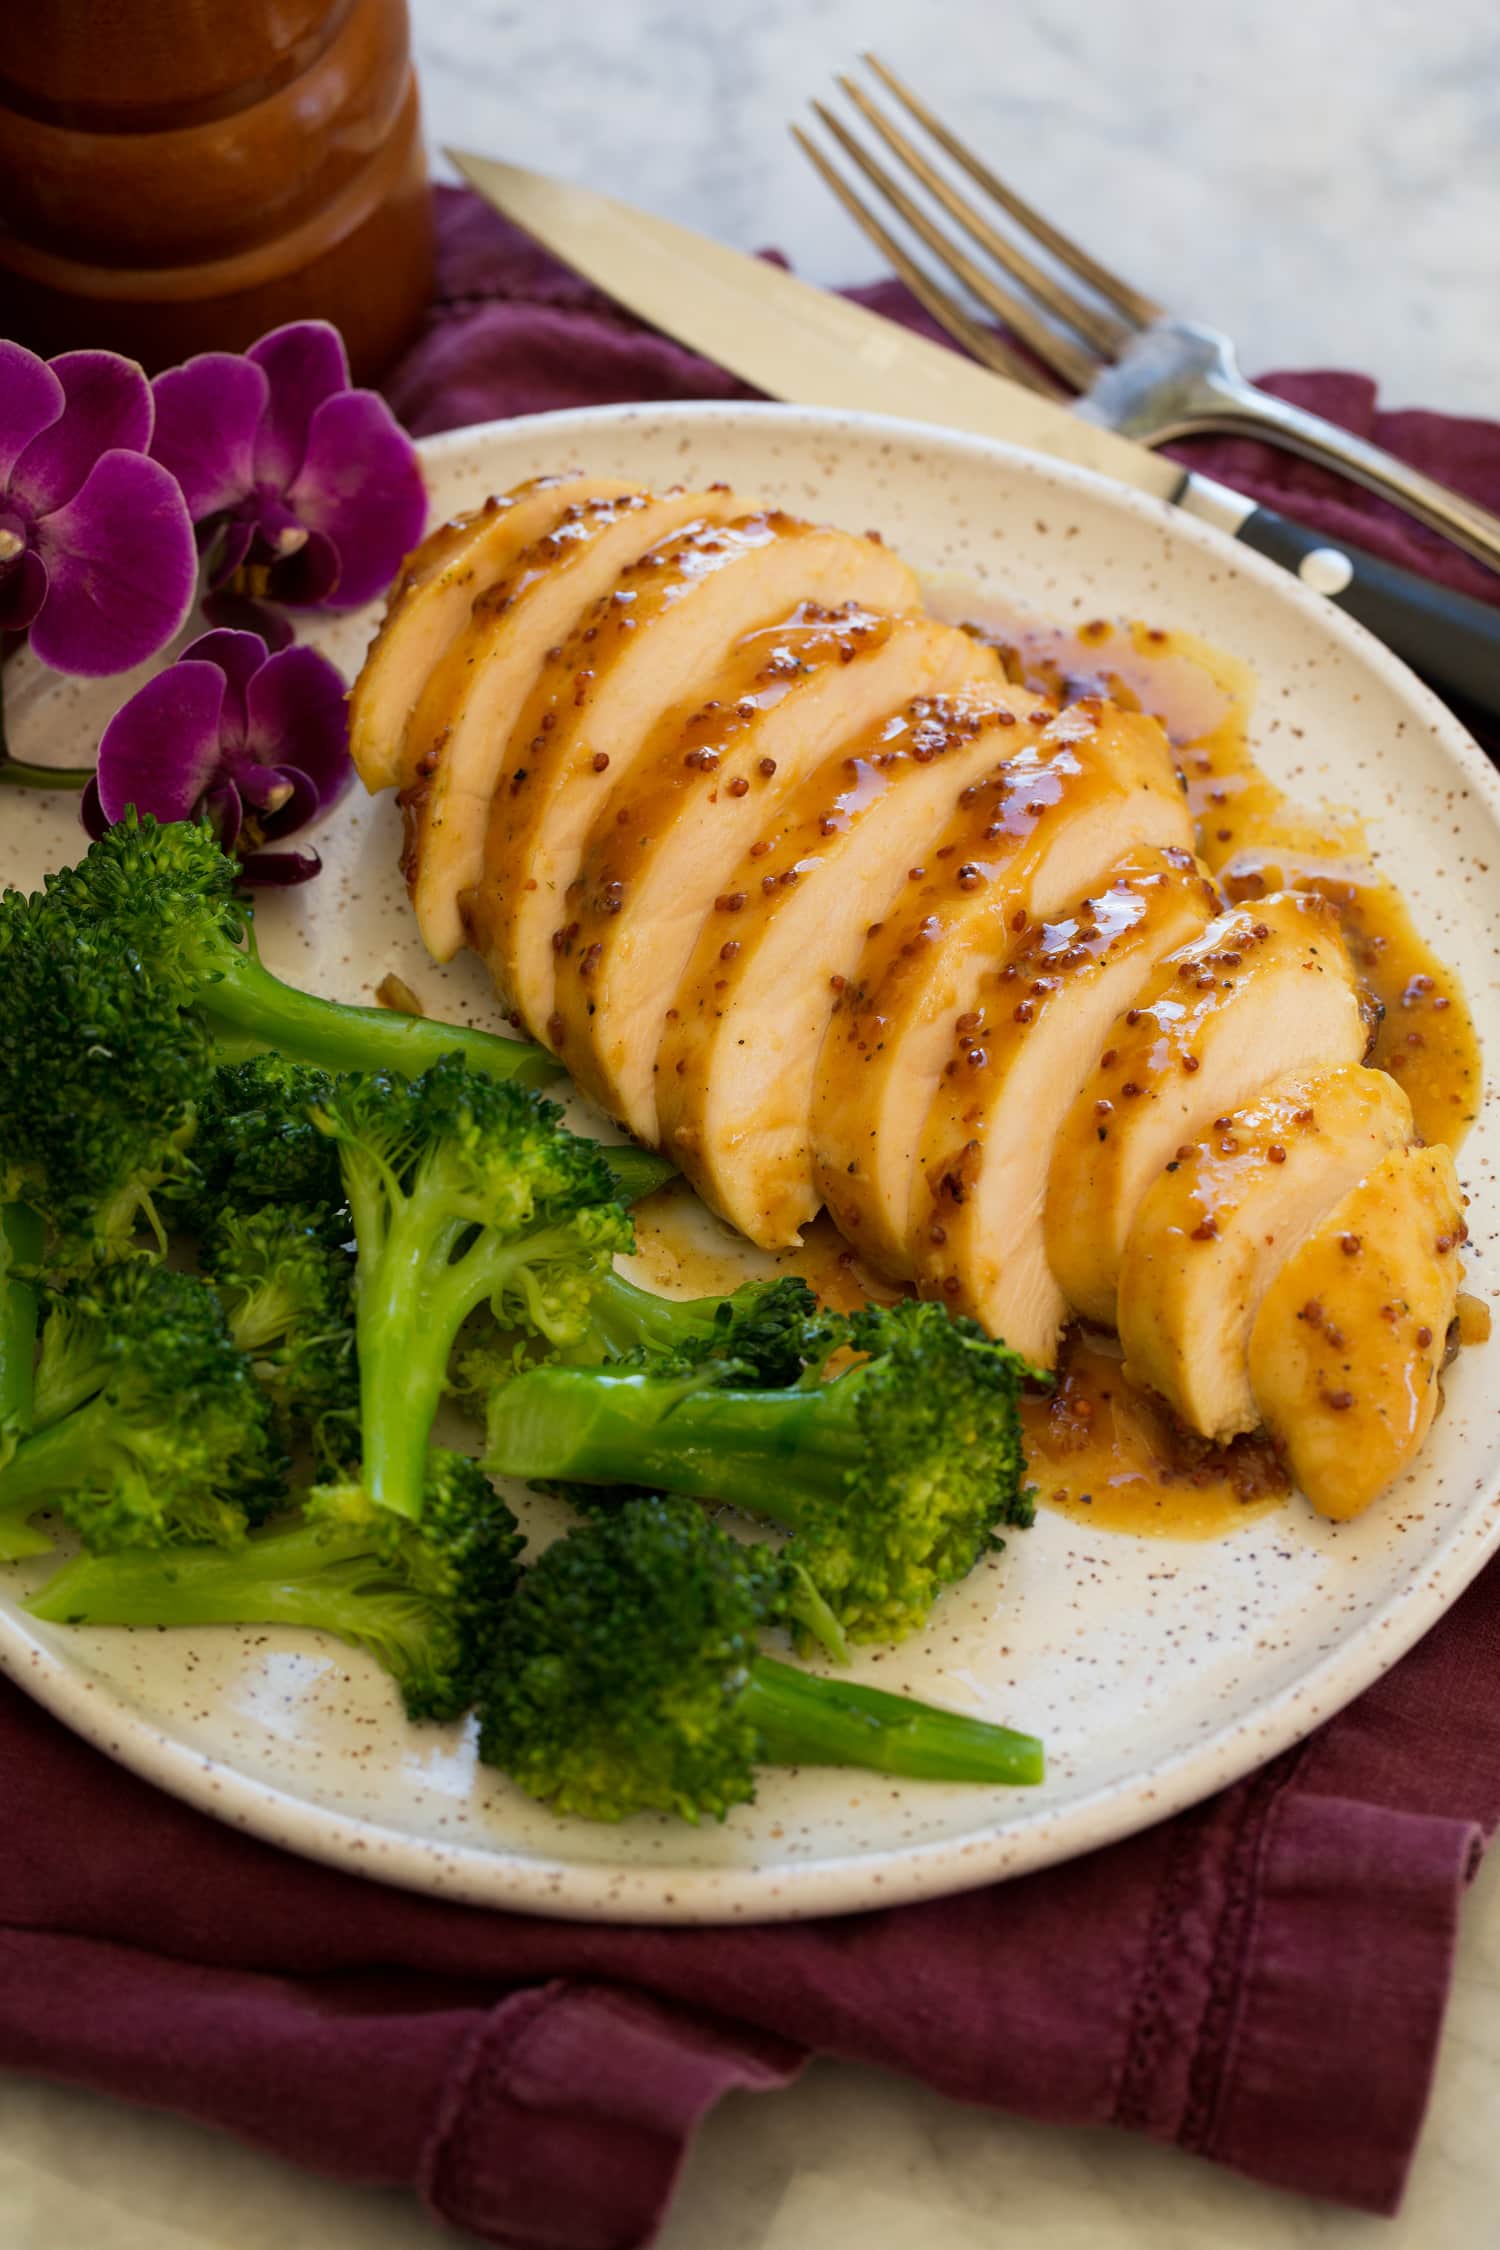 Sliced chicken with honey mustard on a plate with steamed broccoli as a serving suggestion.